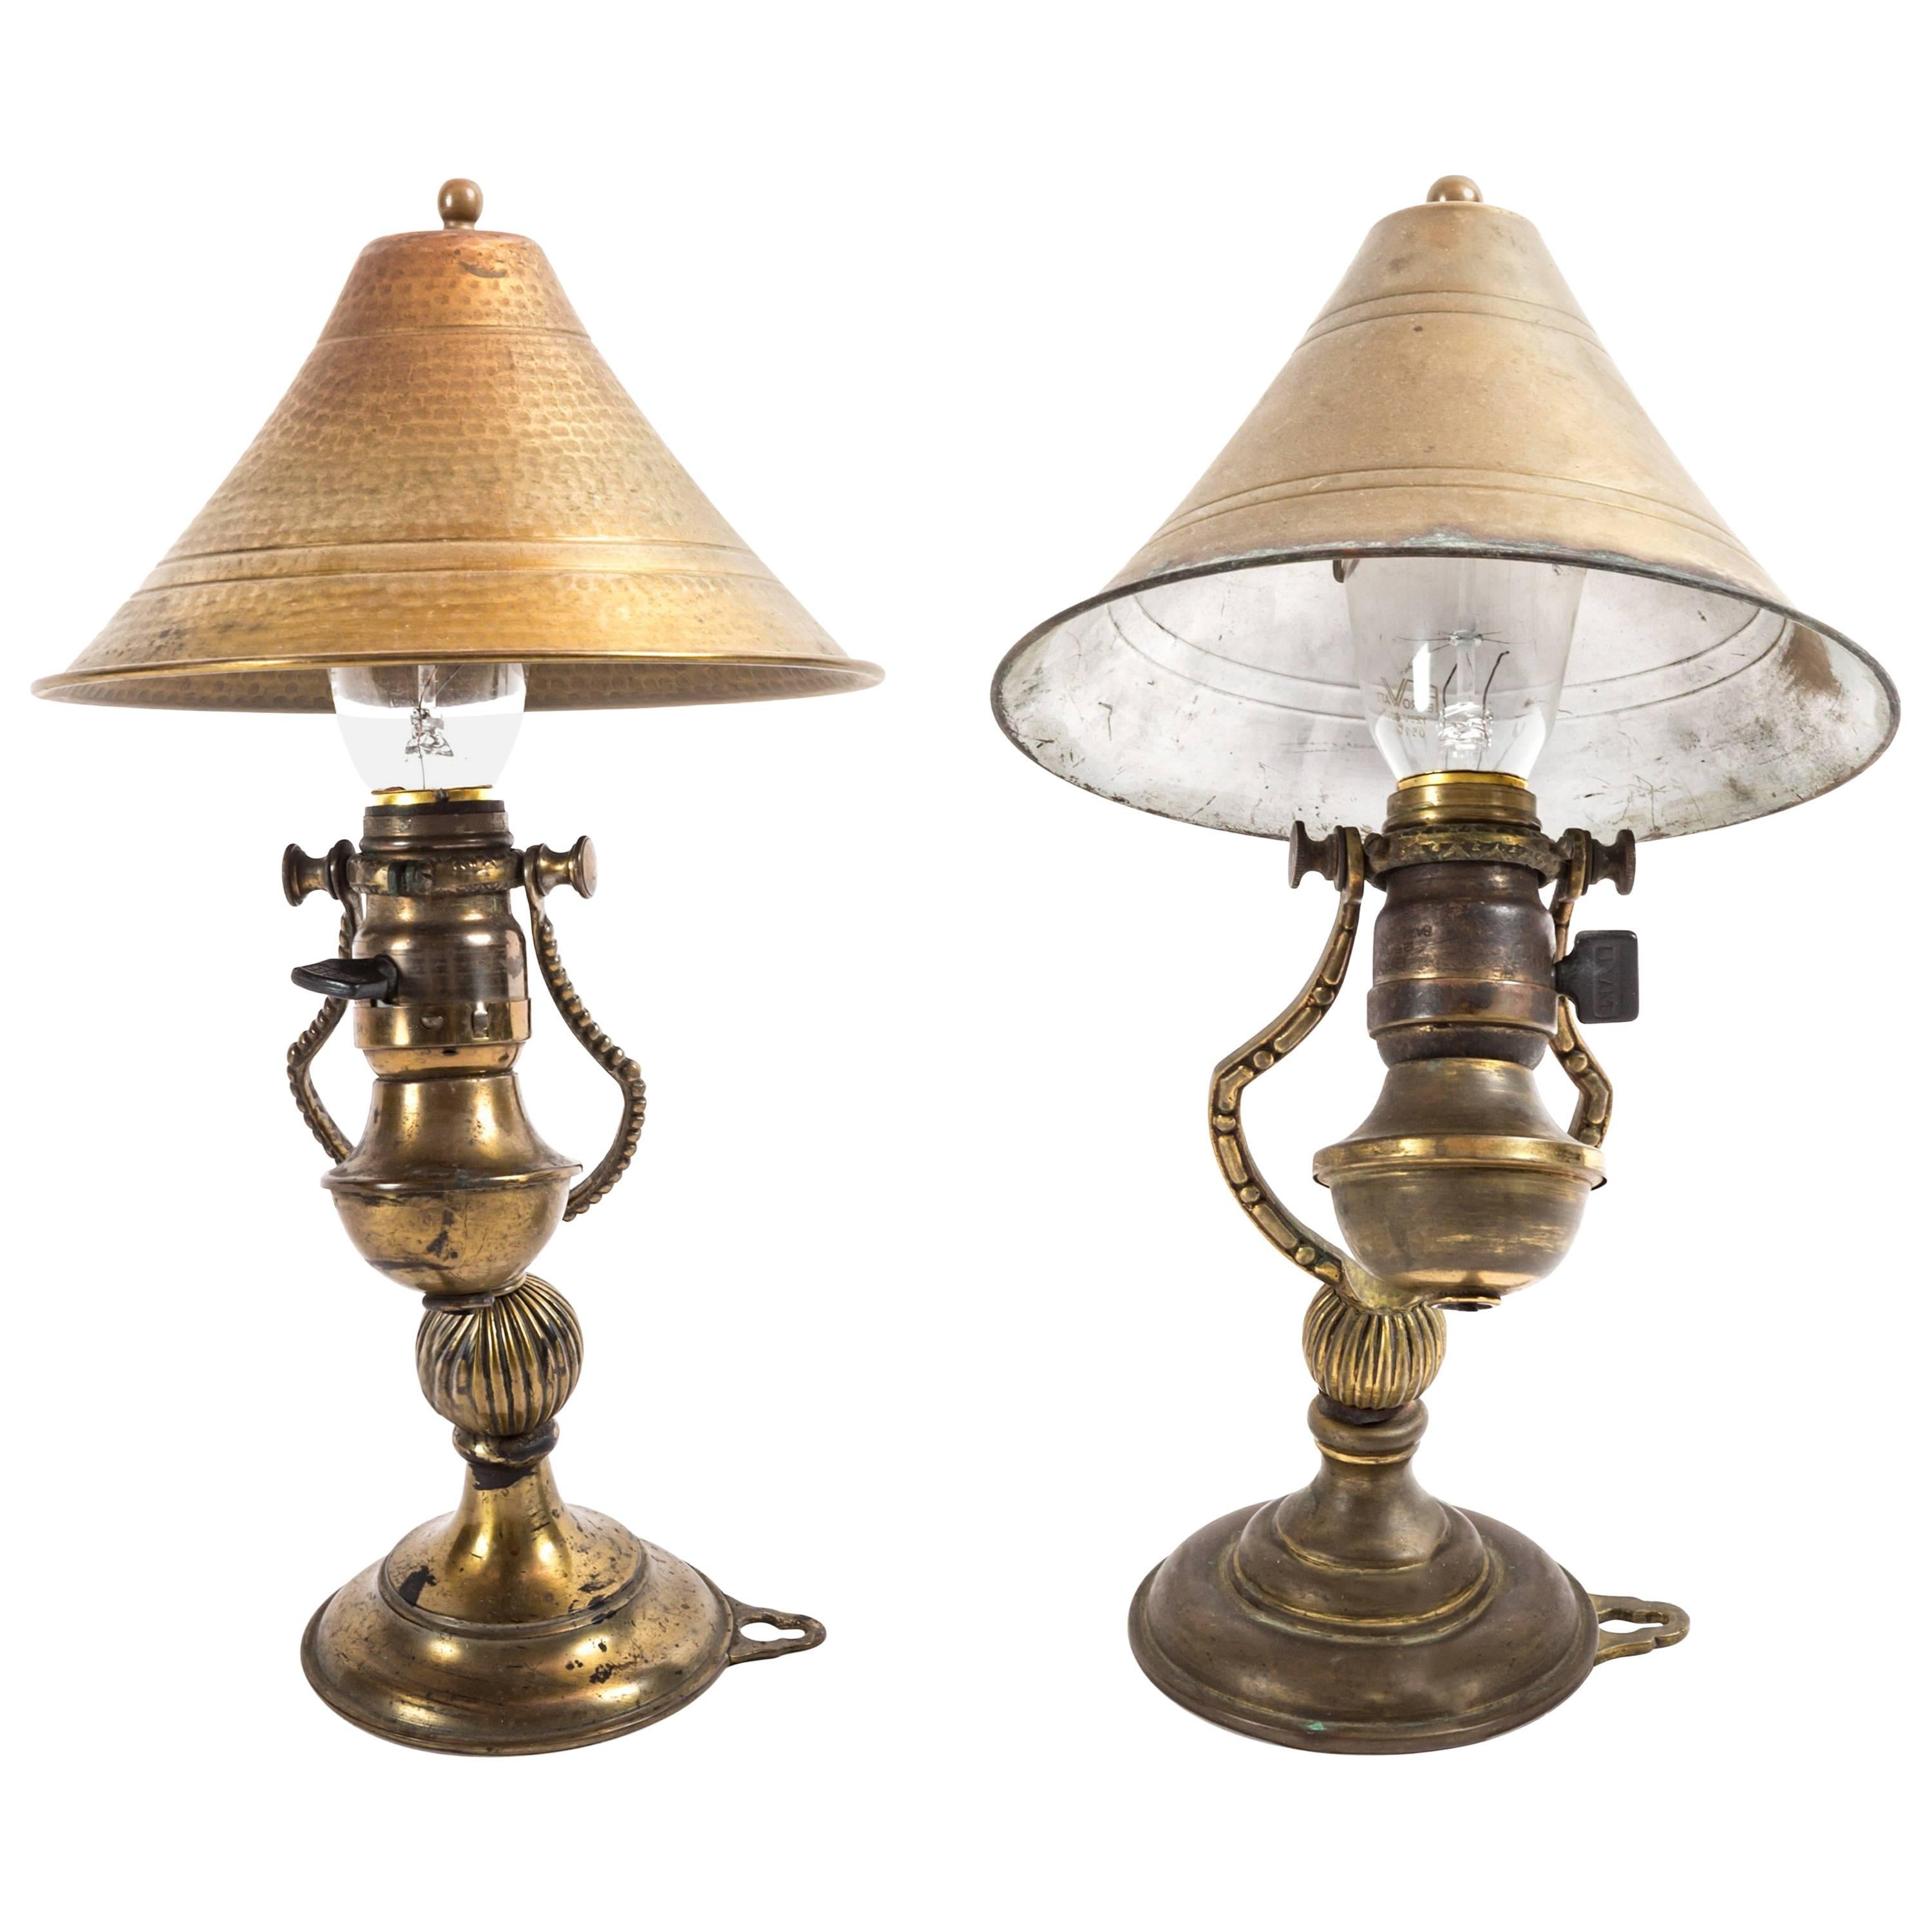 Pair of Aged Brass Wall Sconces with Brass Shades